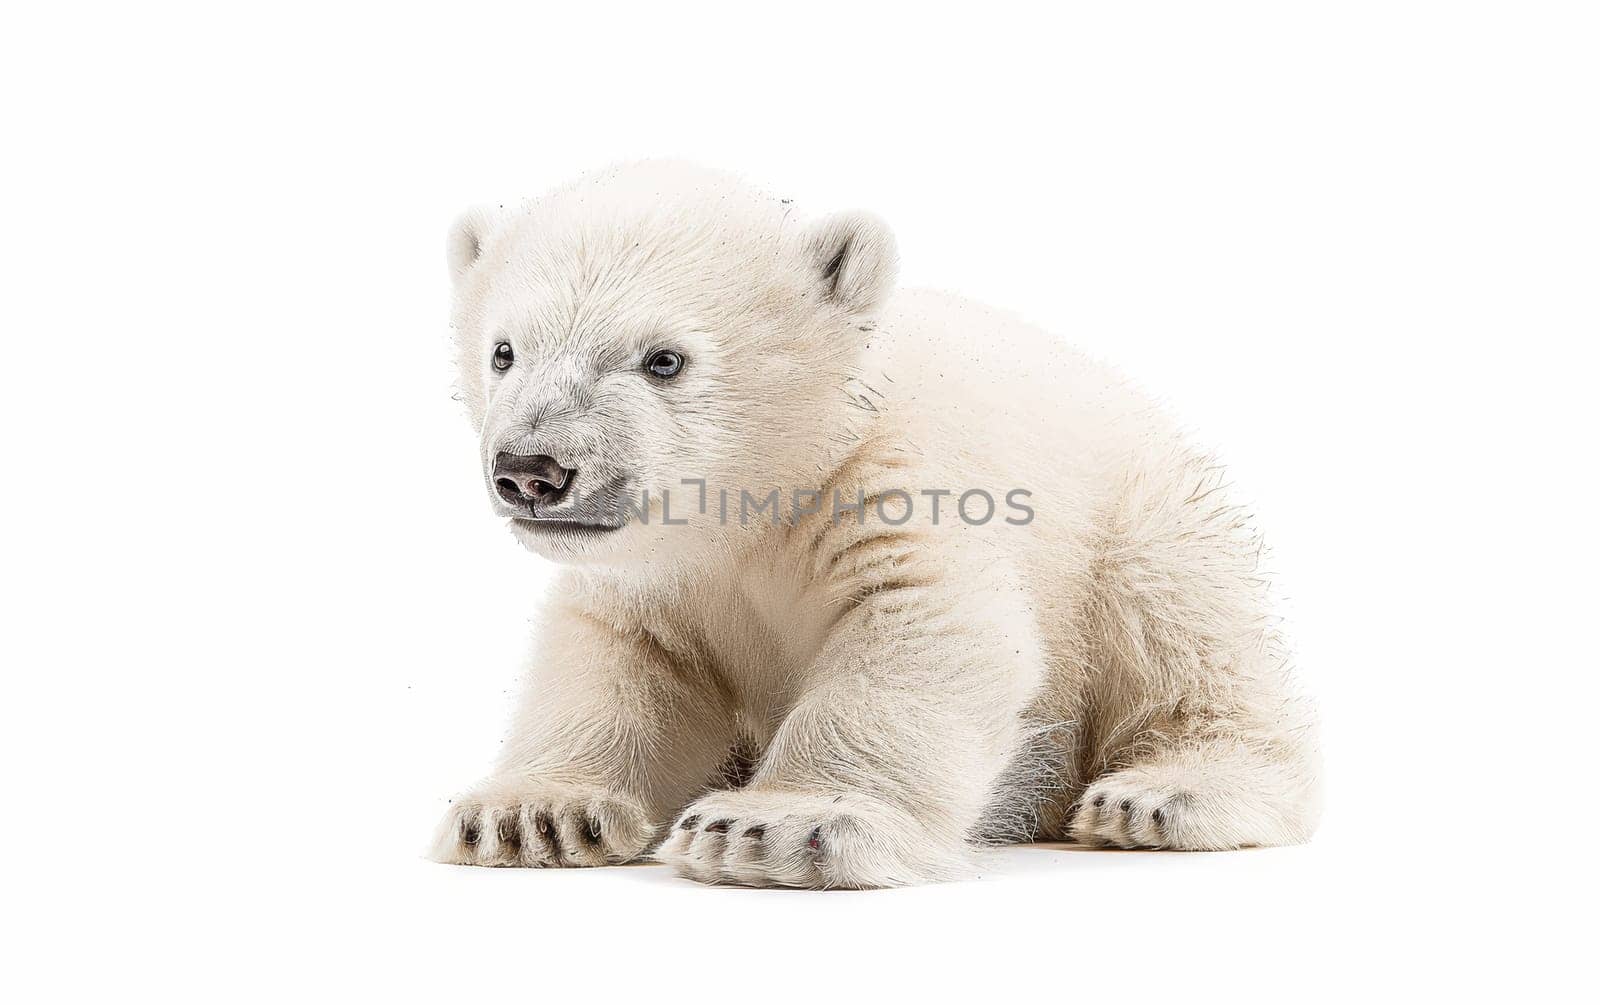 A polar bear cub lies comfortably against a white background, its innocence and vulnerability on full display. The cub's soft fur and relaxed posture create an image of peacefulness and playfulness. by sfinks